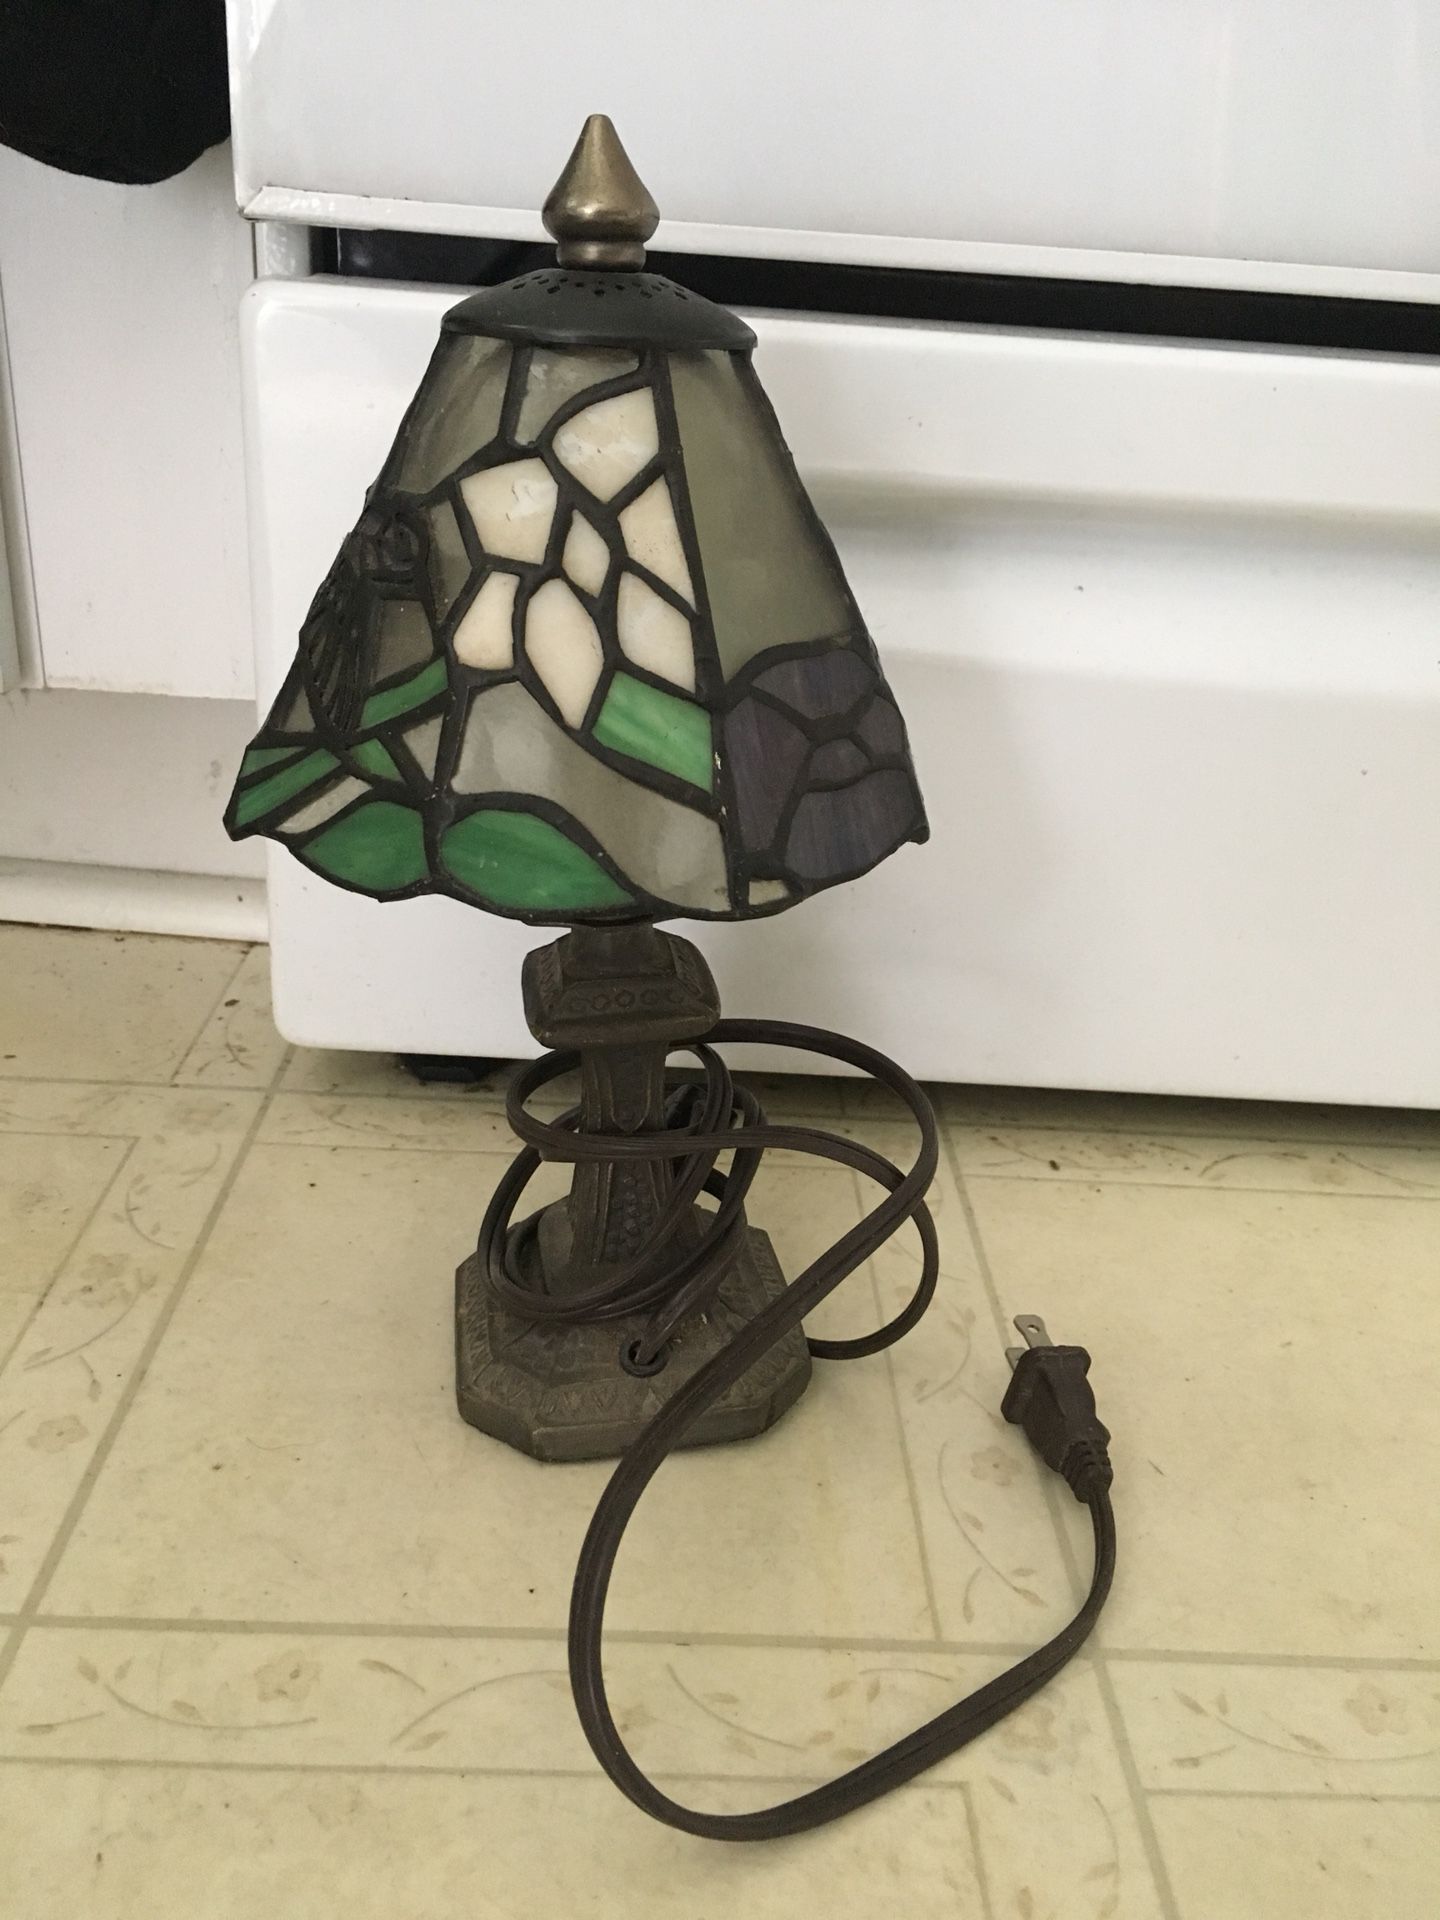 Hummingbird stained glass lamp